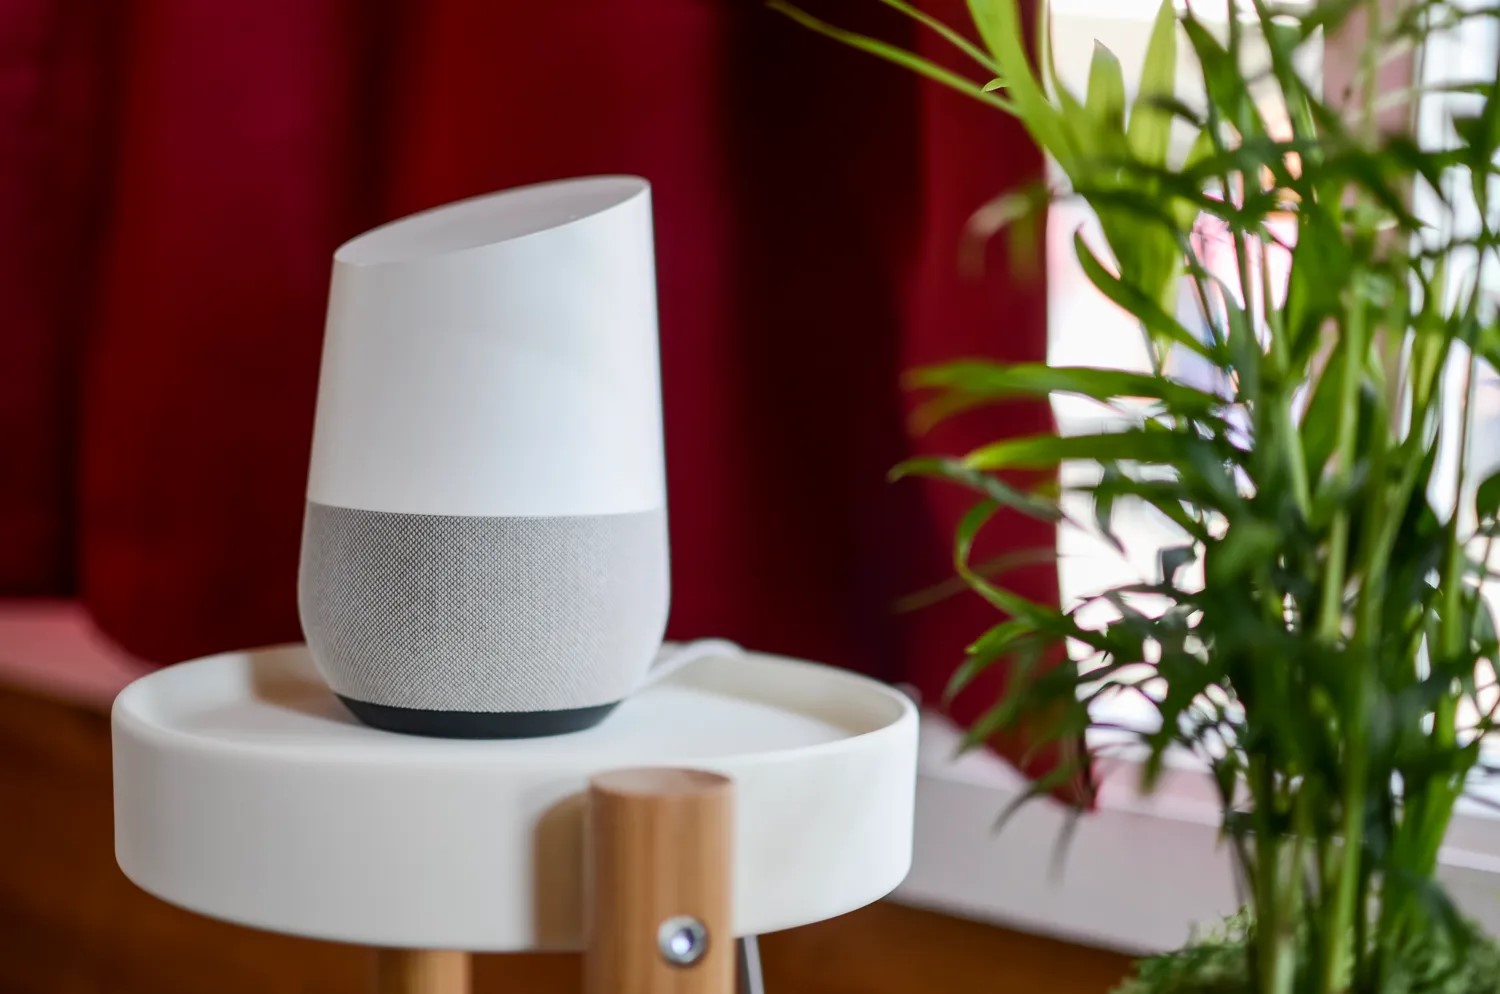 How To Connect Google Home To Hotspot